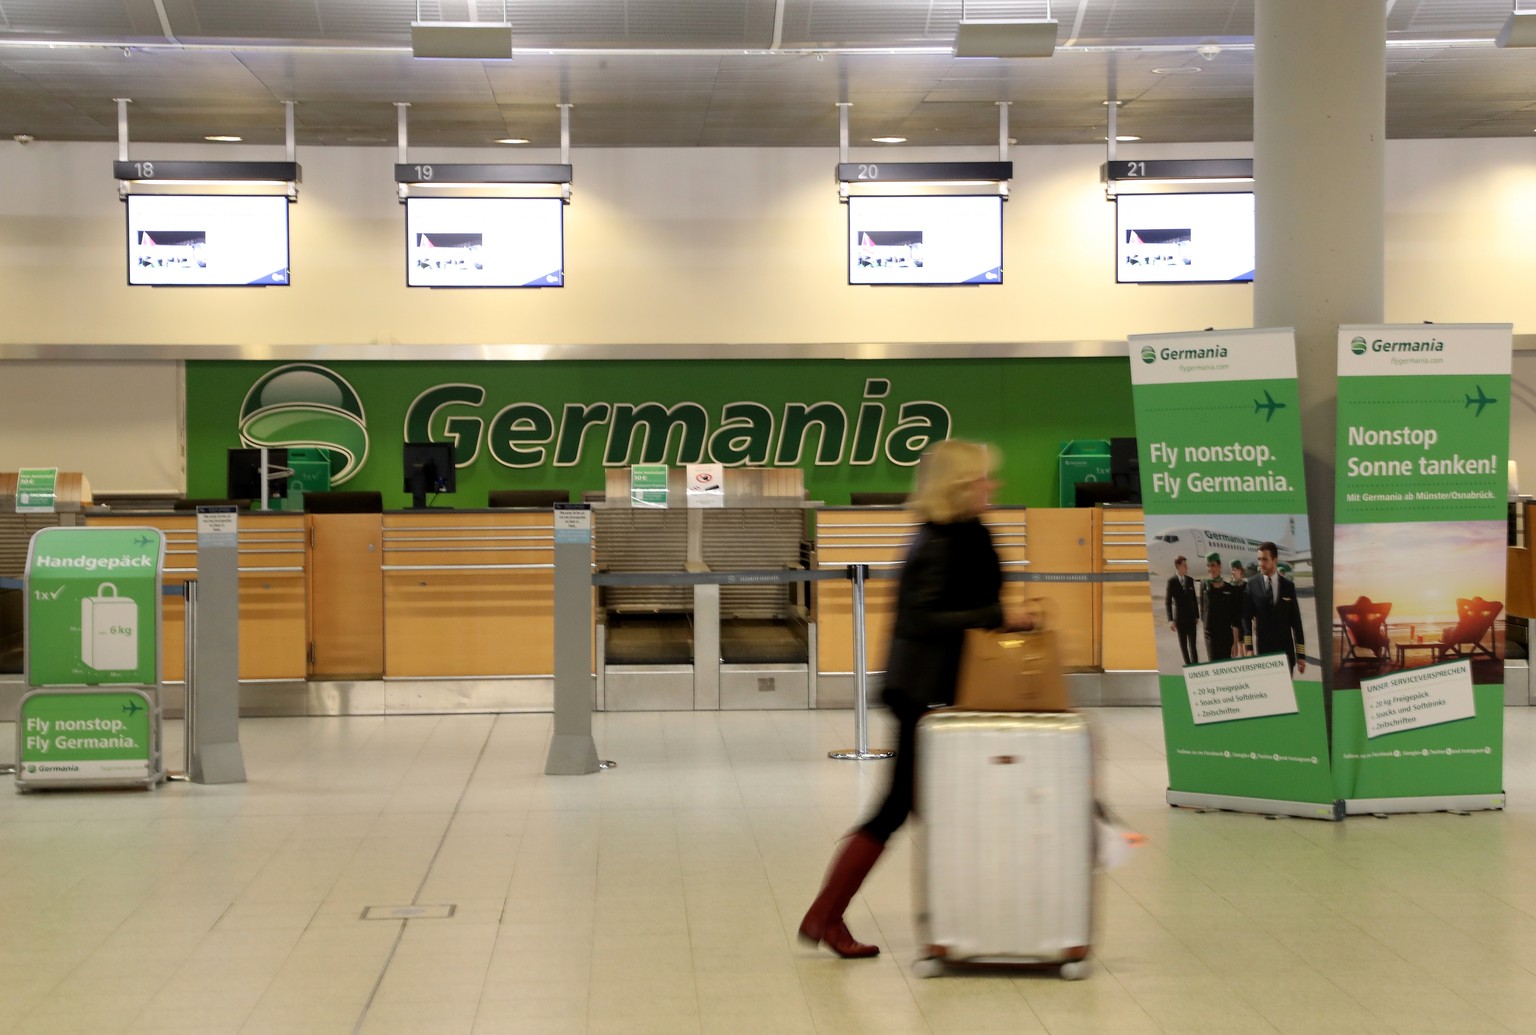 epa07345430 A passenger walks past an empty check in counter of Germania airline at the Muenster/Osnabrueck airport in Greven Germany, 05 February 2019. Germania Airlines filed for bankruptcy on 04 Fe ...